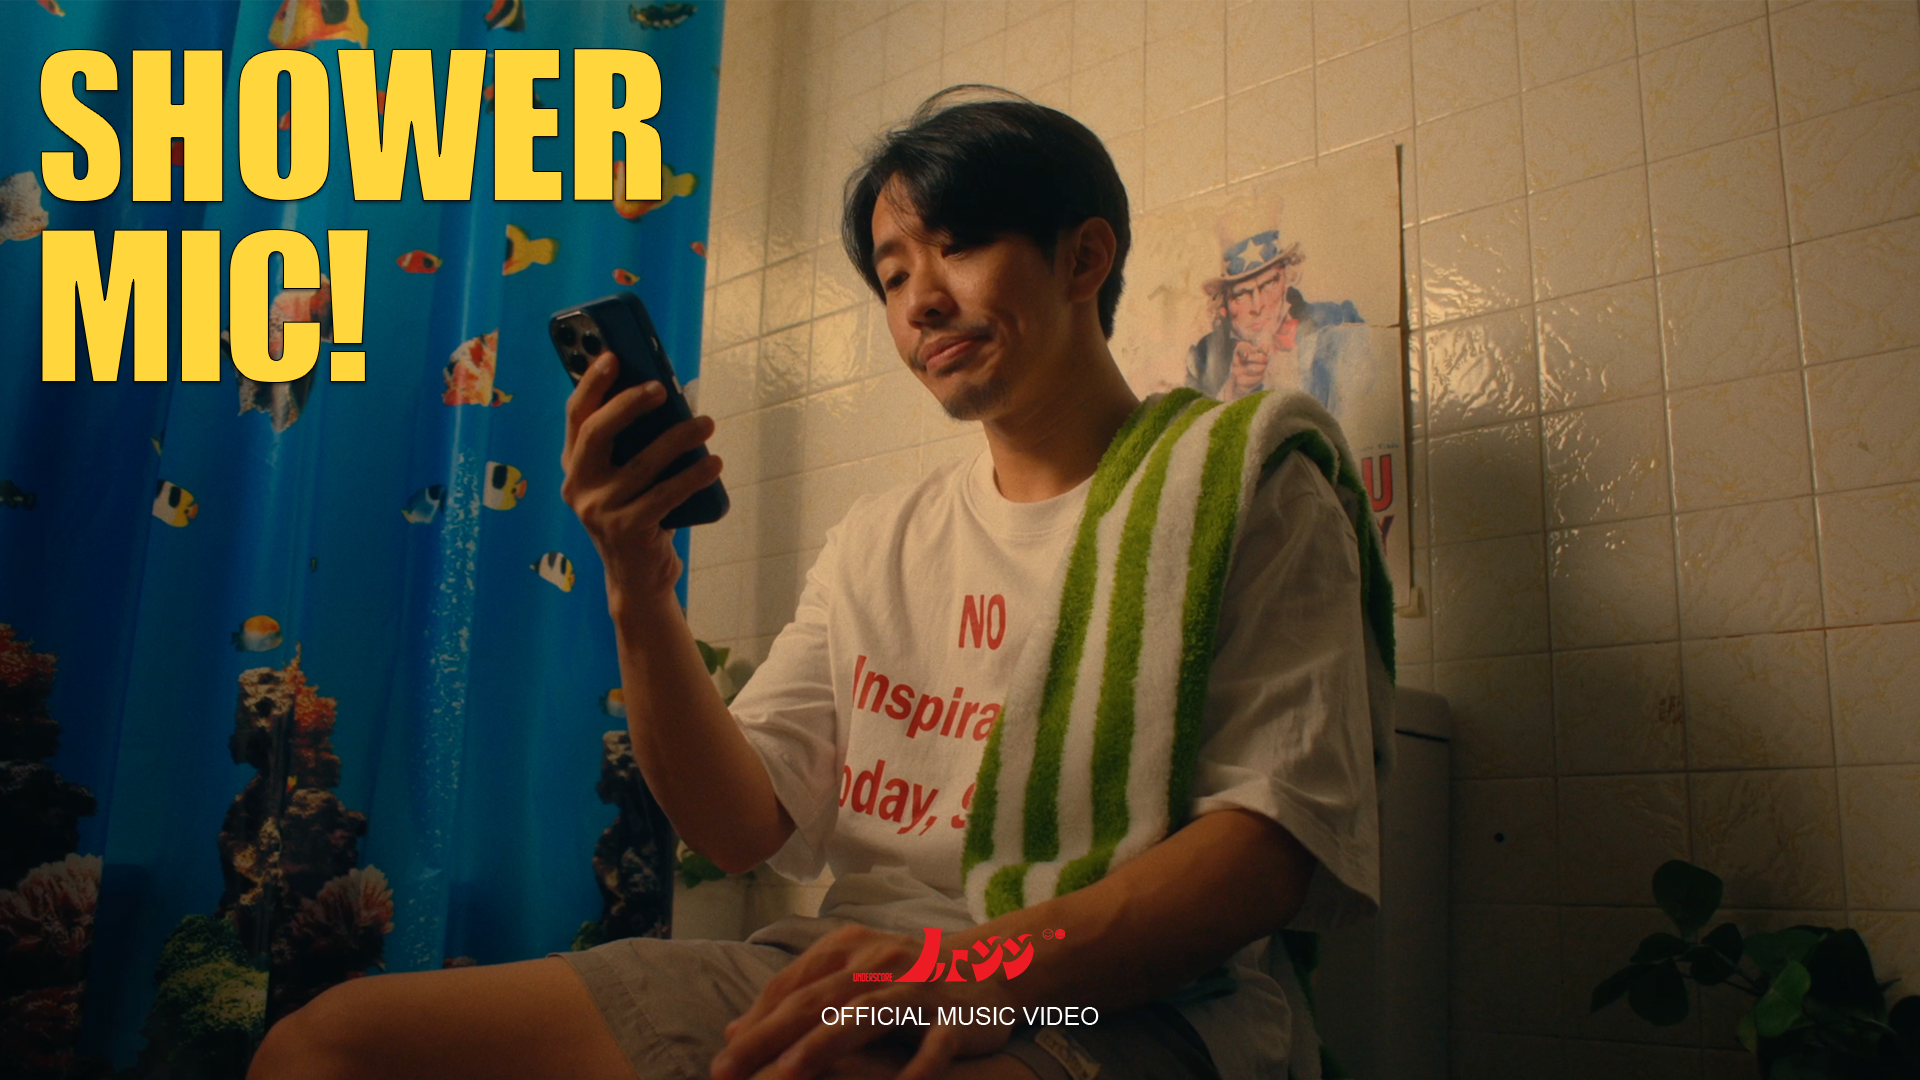 _less / Shower Mic! (Official Video)